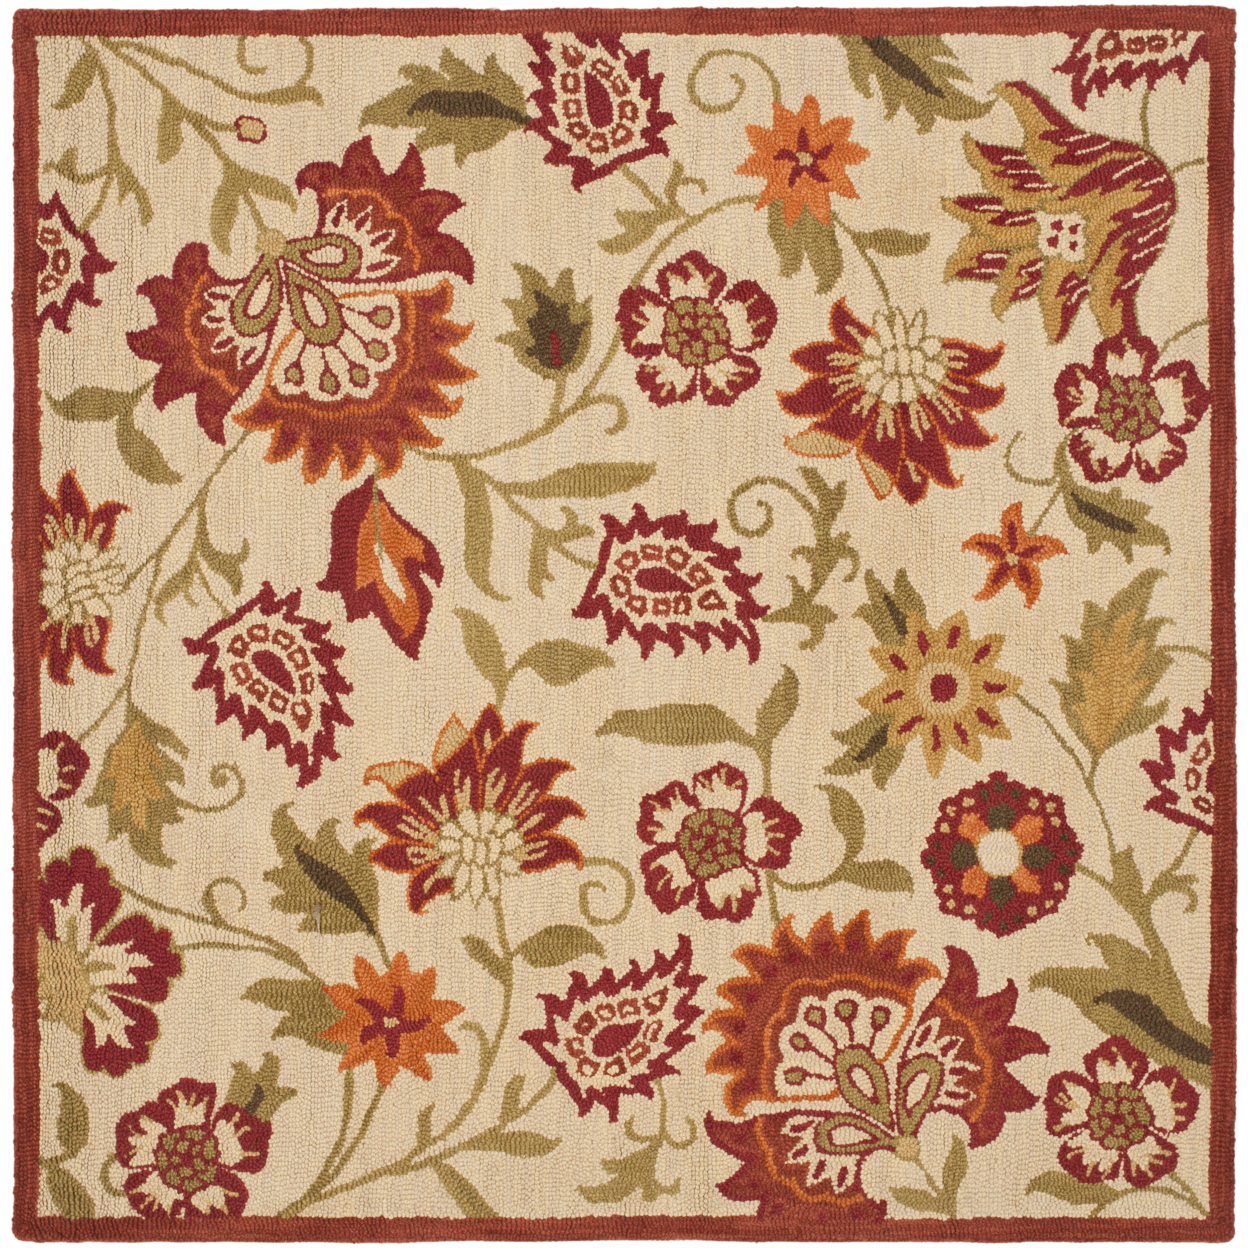 SAFAVIEH Blossom BLM862A Hand-hooked Beige / Multi Rug - 6' Square